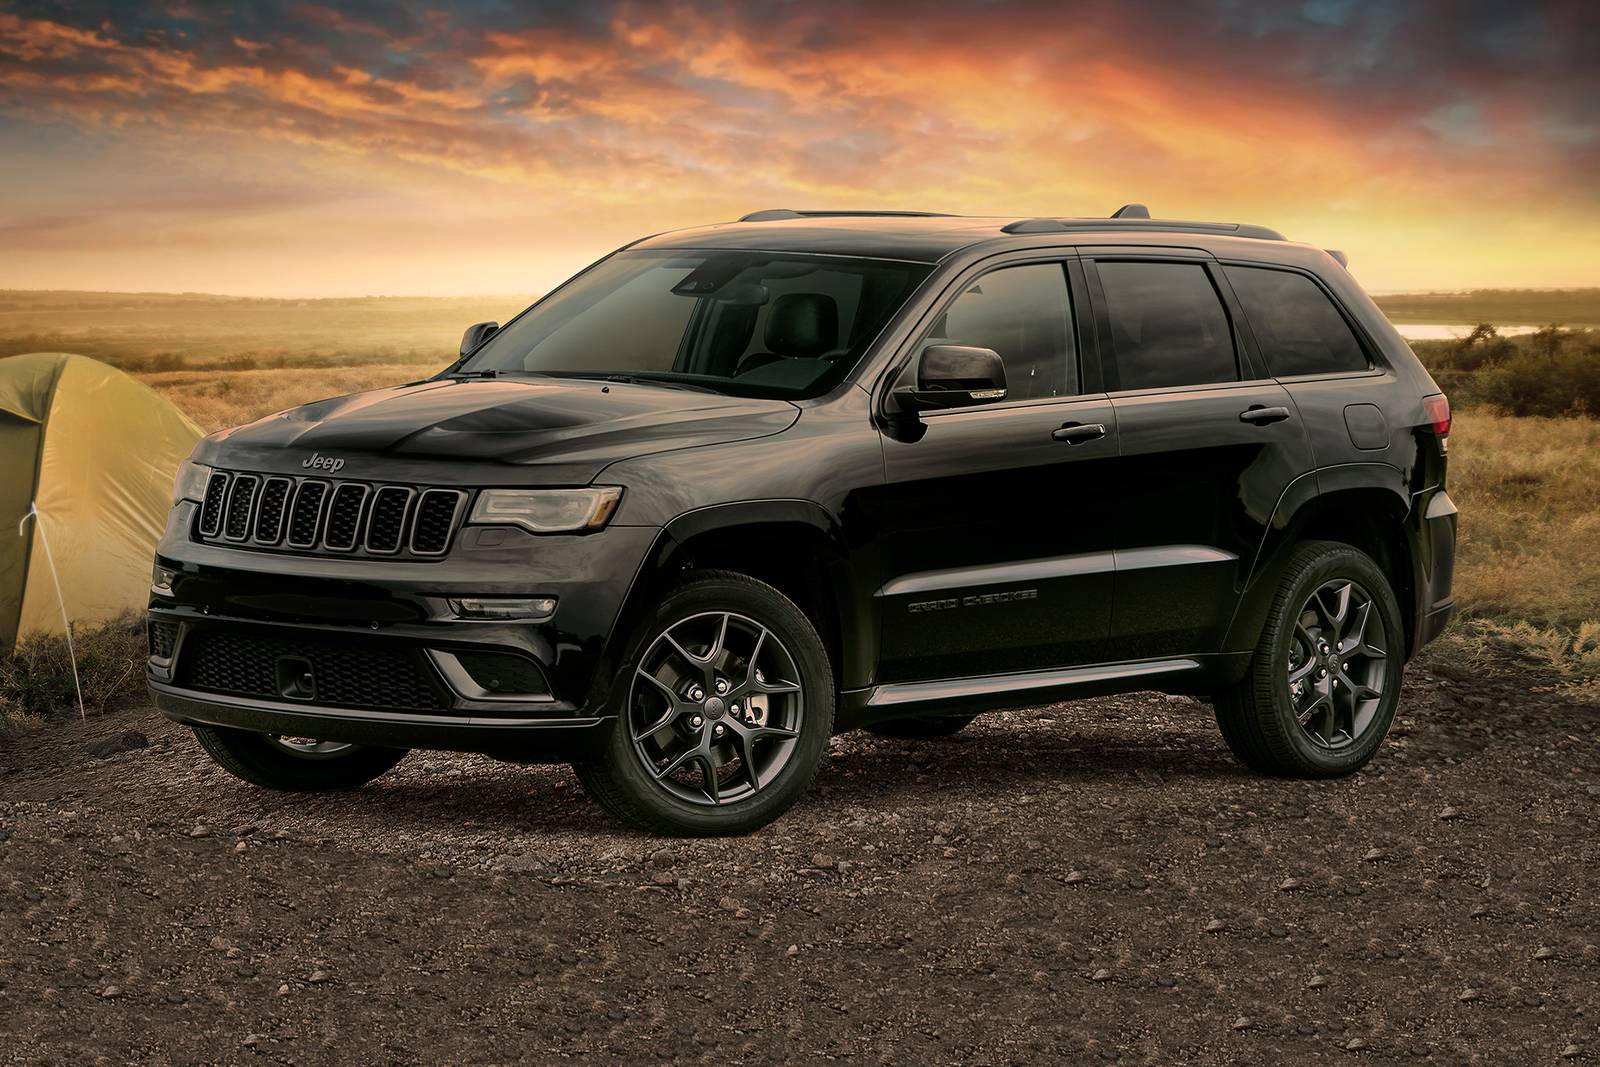 2019 Jeep Grand Cherokee Review & Ratings | Edmunds